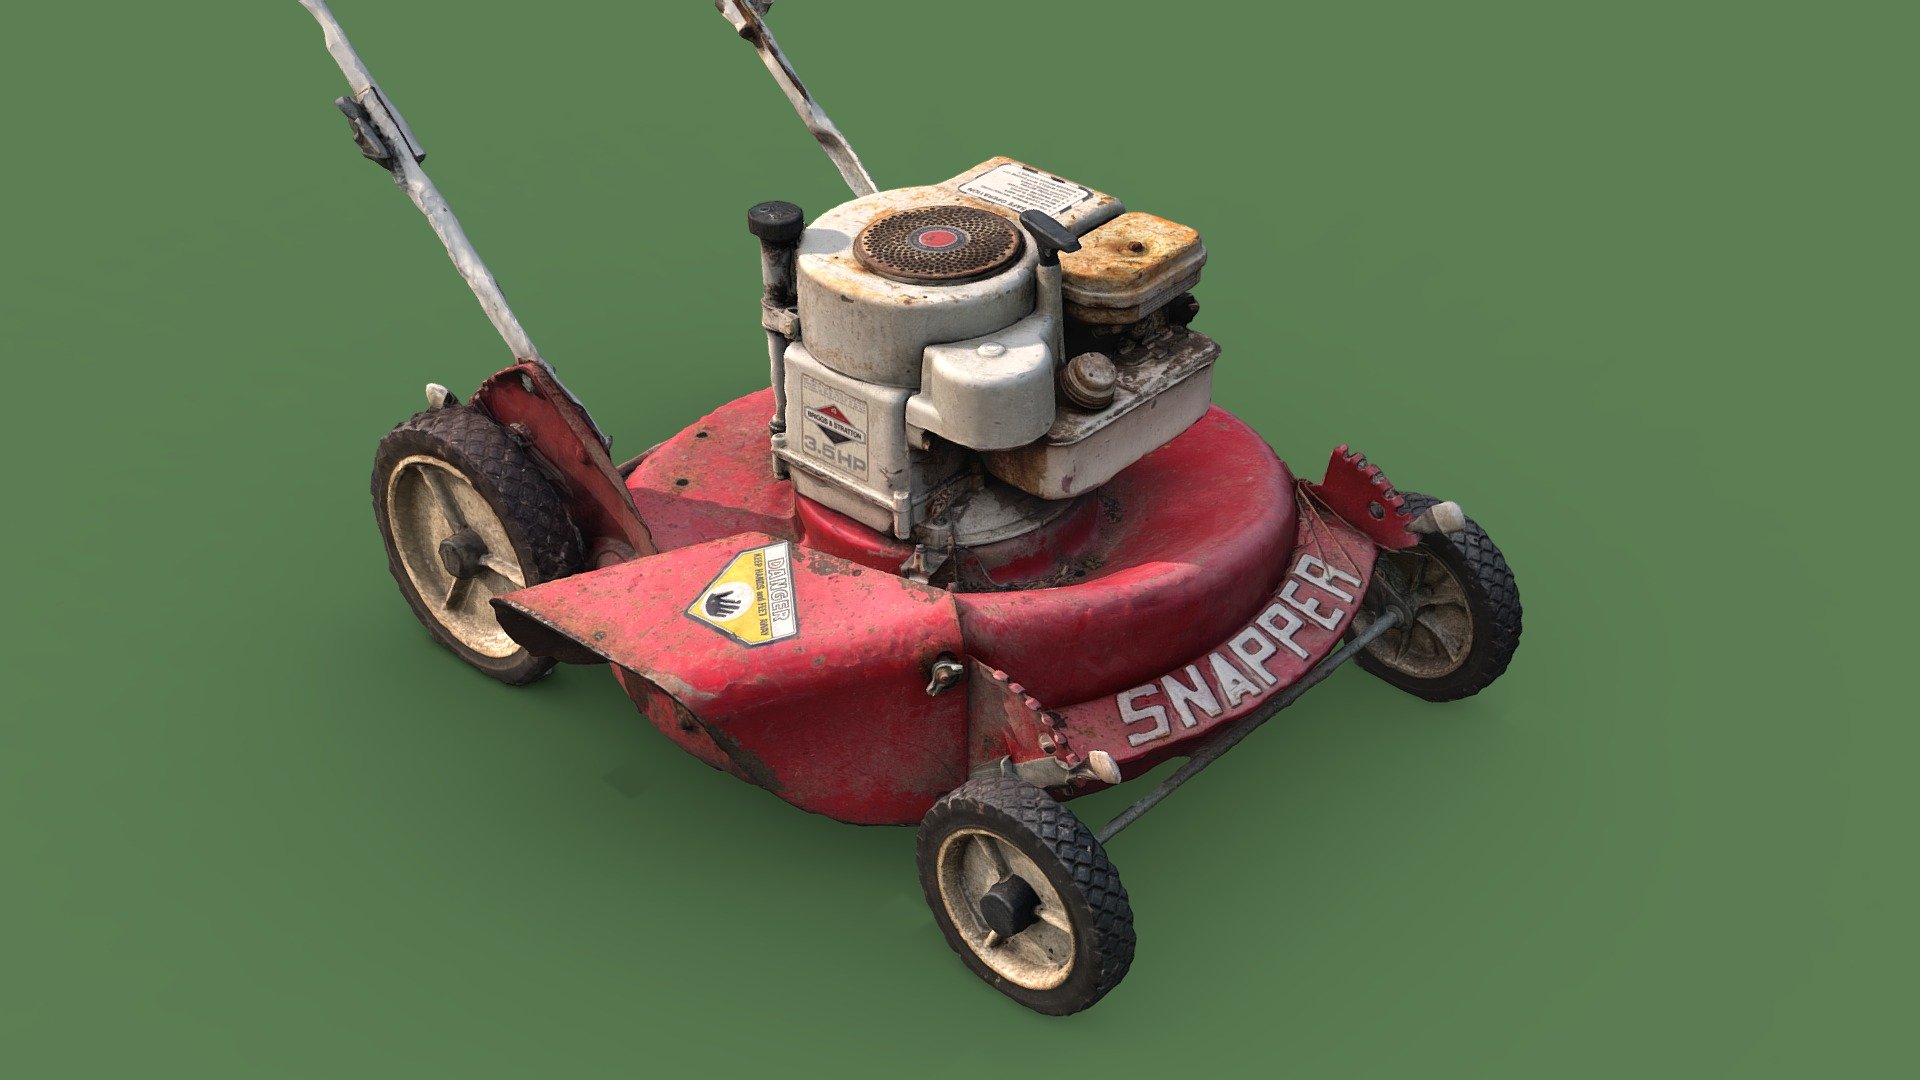 It is a lawn mower. 
for mowing lawns.
rebulit the handle because it doesnt scan well

made with polycam photo capture - Push lawnmower scan - Buy Royalty Free 3D model by Austin Beaulier (@Austin.Beaulier) 3d model